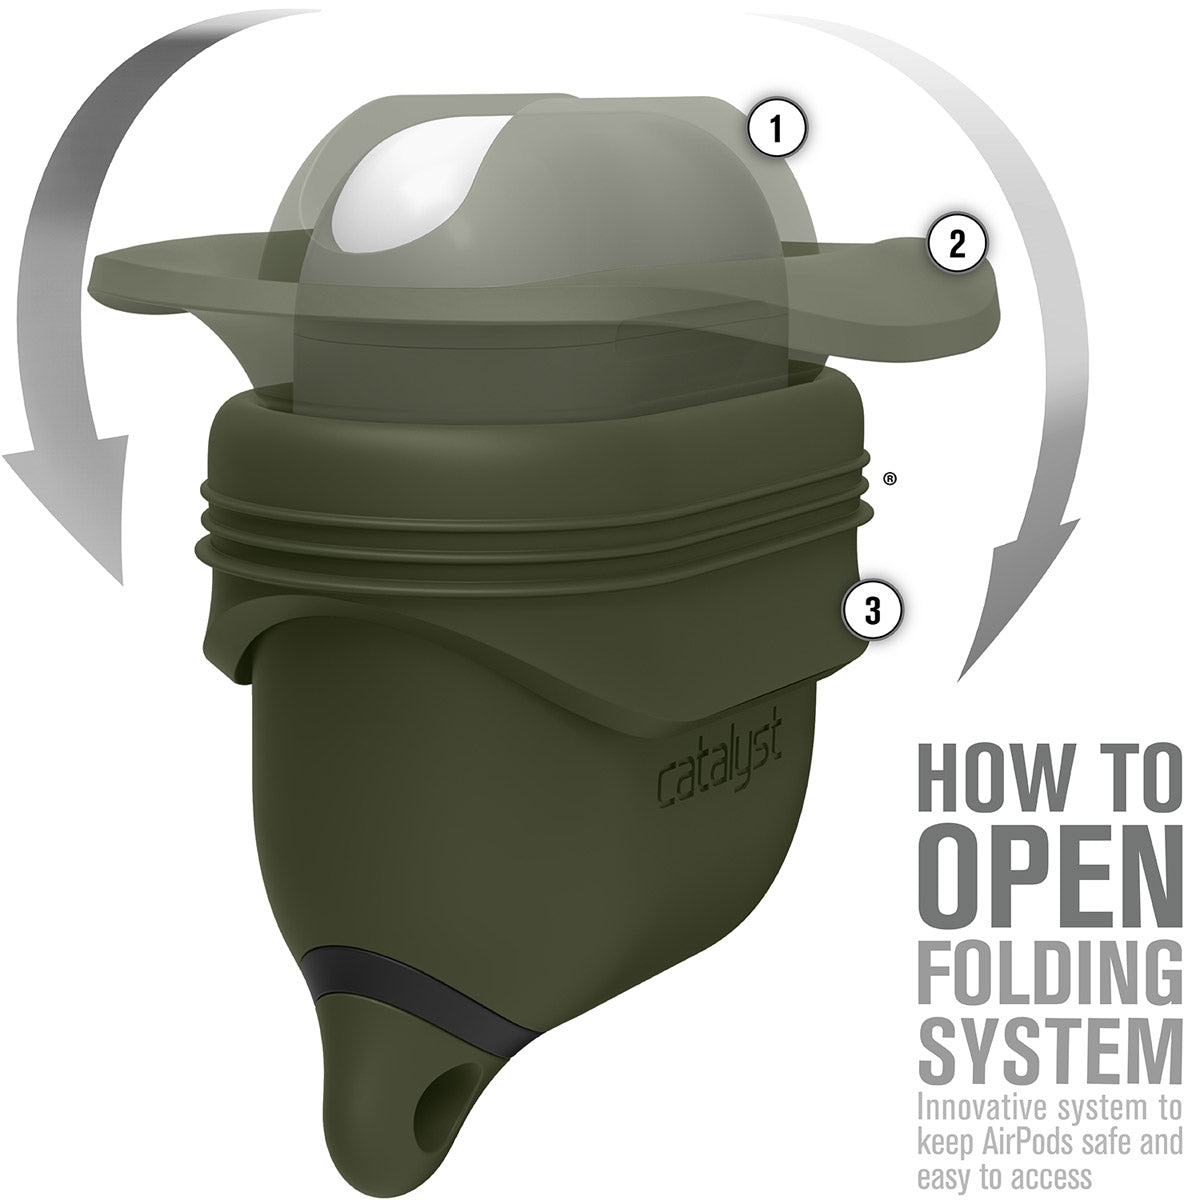 Catalyst airpods gen2/1 waterproof case + carabiner showing the-foldable silicone in army green text reads how to open folding system innovative system to keep airpods safe and easy to access